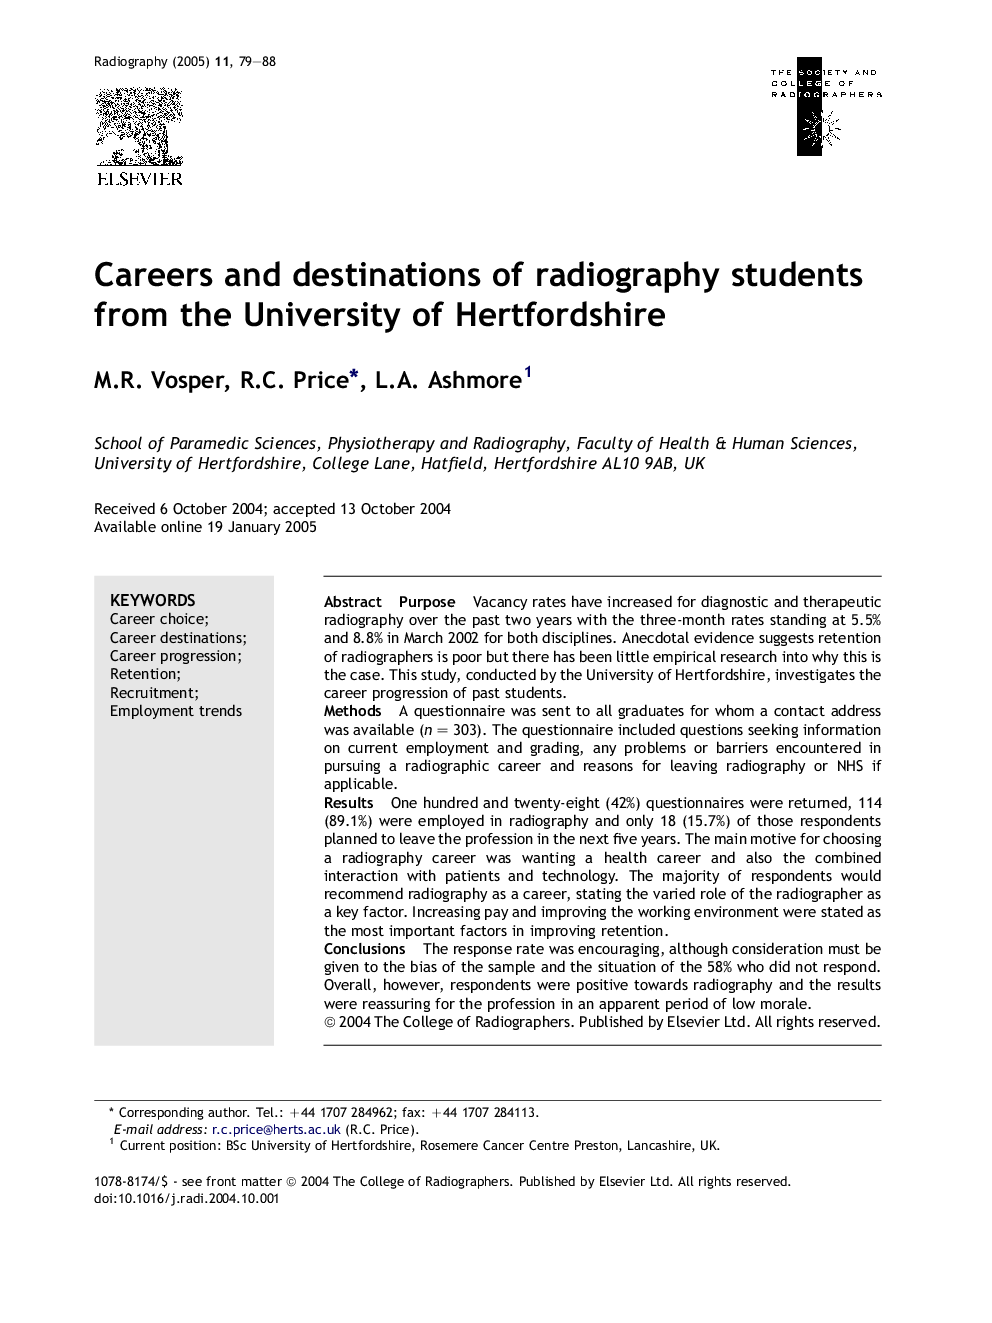 Careers and destinations of radiography students from the University of Hertfordshire